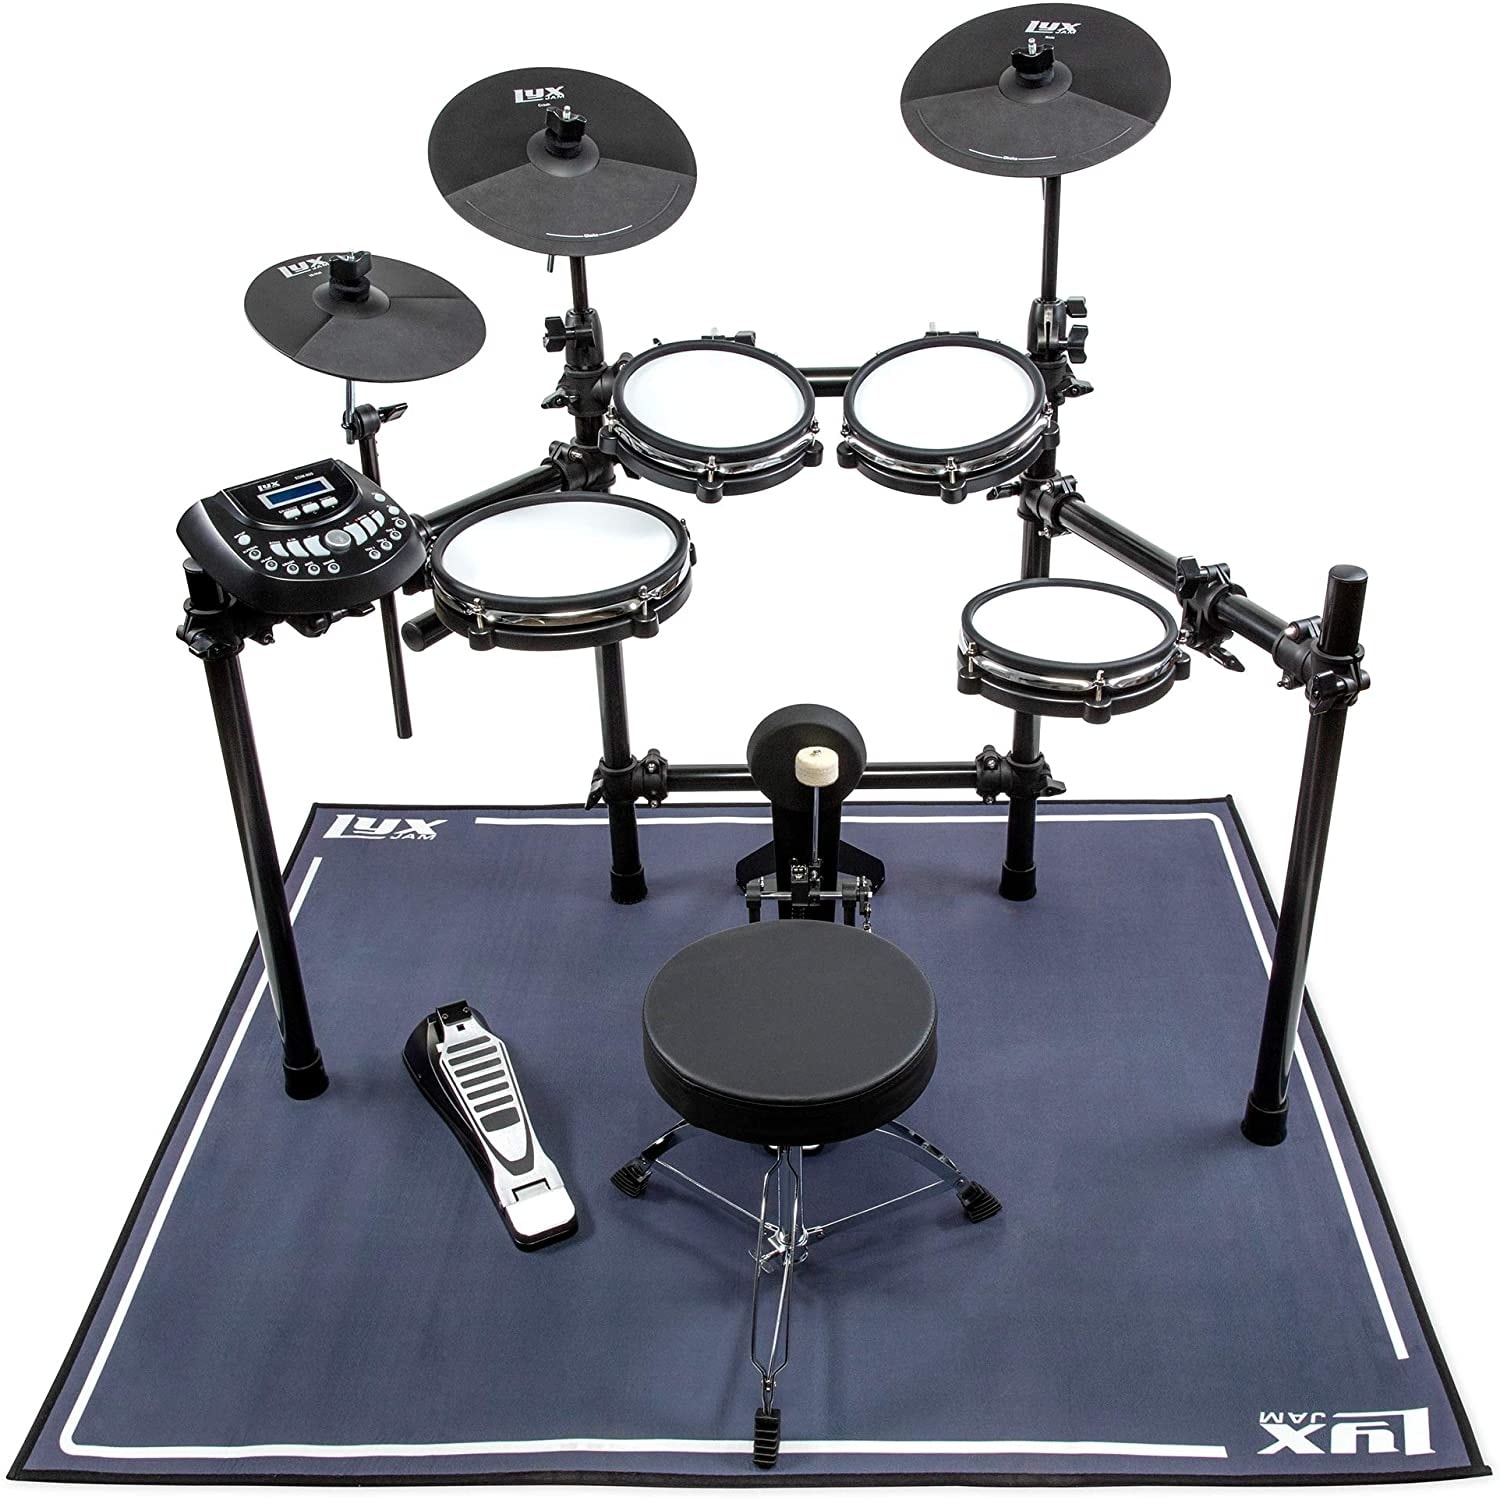 https://ak1.ostkcdn.com/images/products/is/images/direct/4a355050d3e1bffde989cb0bbd4f6fc39a3d683a/LyxJam-Drum-Rug-Mat-with-Fabric-Non-Slip-Bottom.jpg